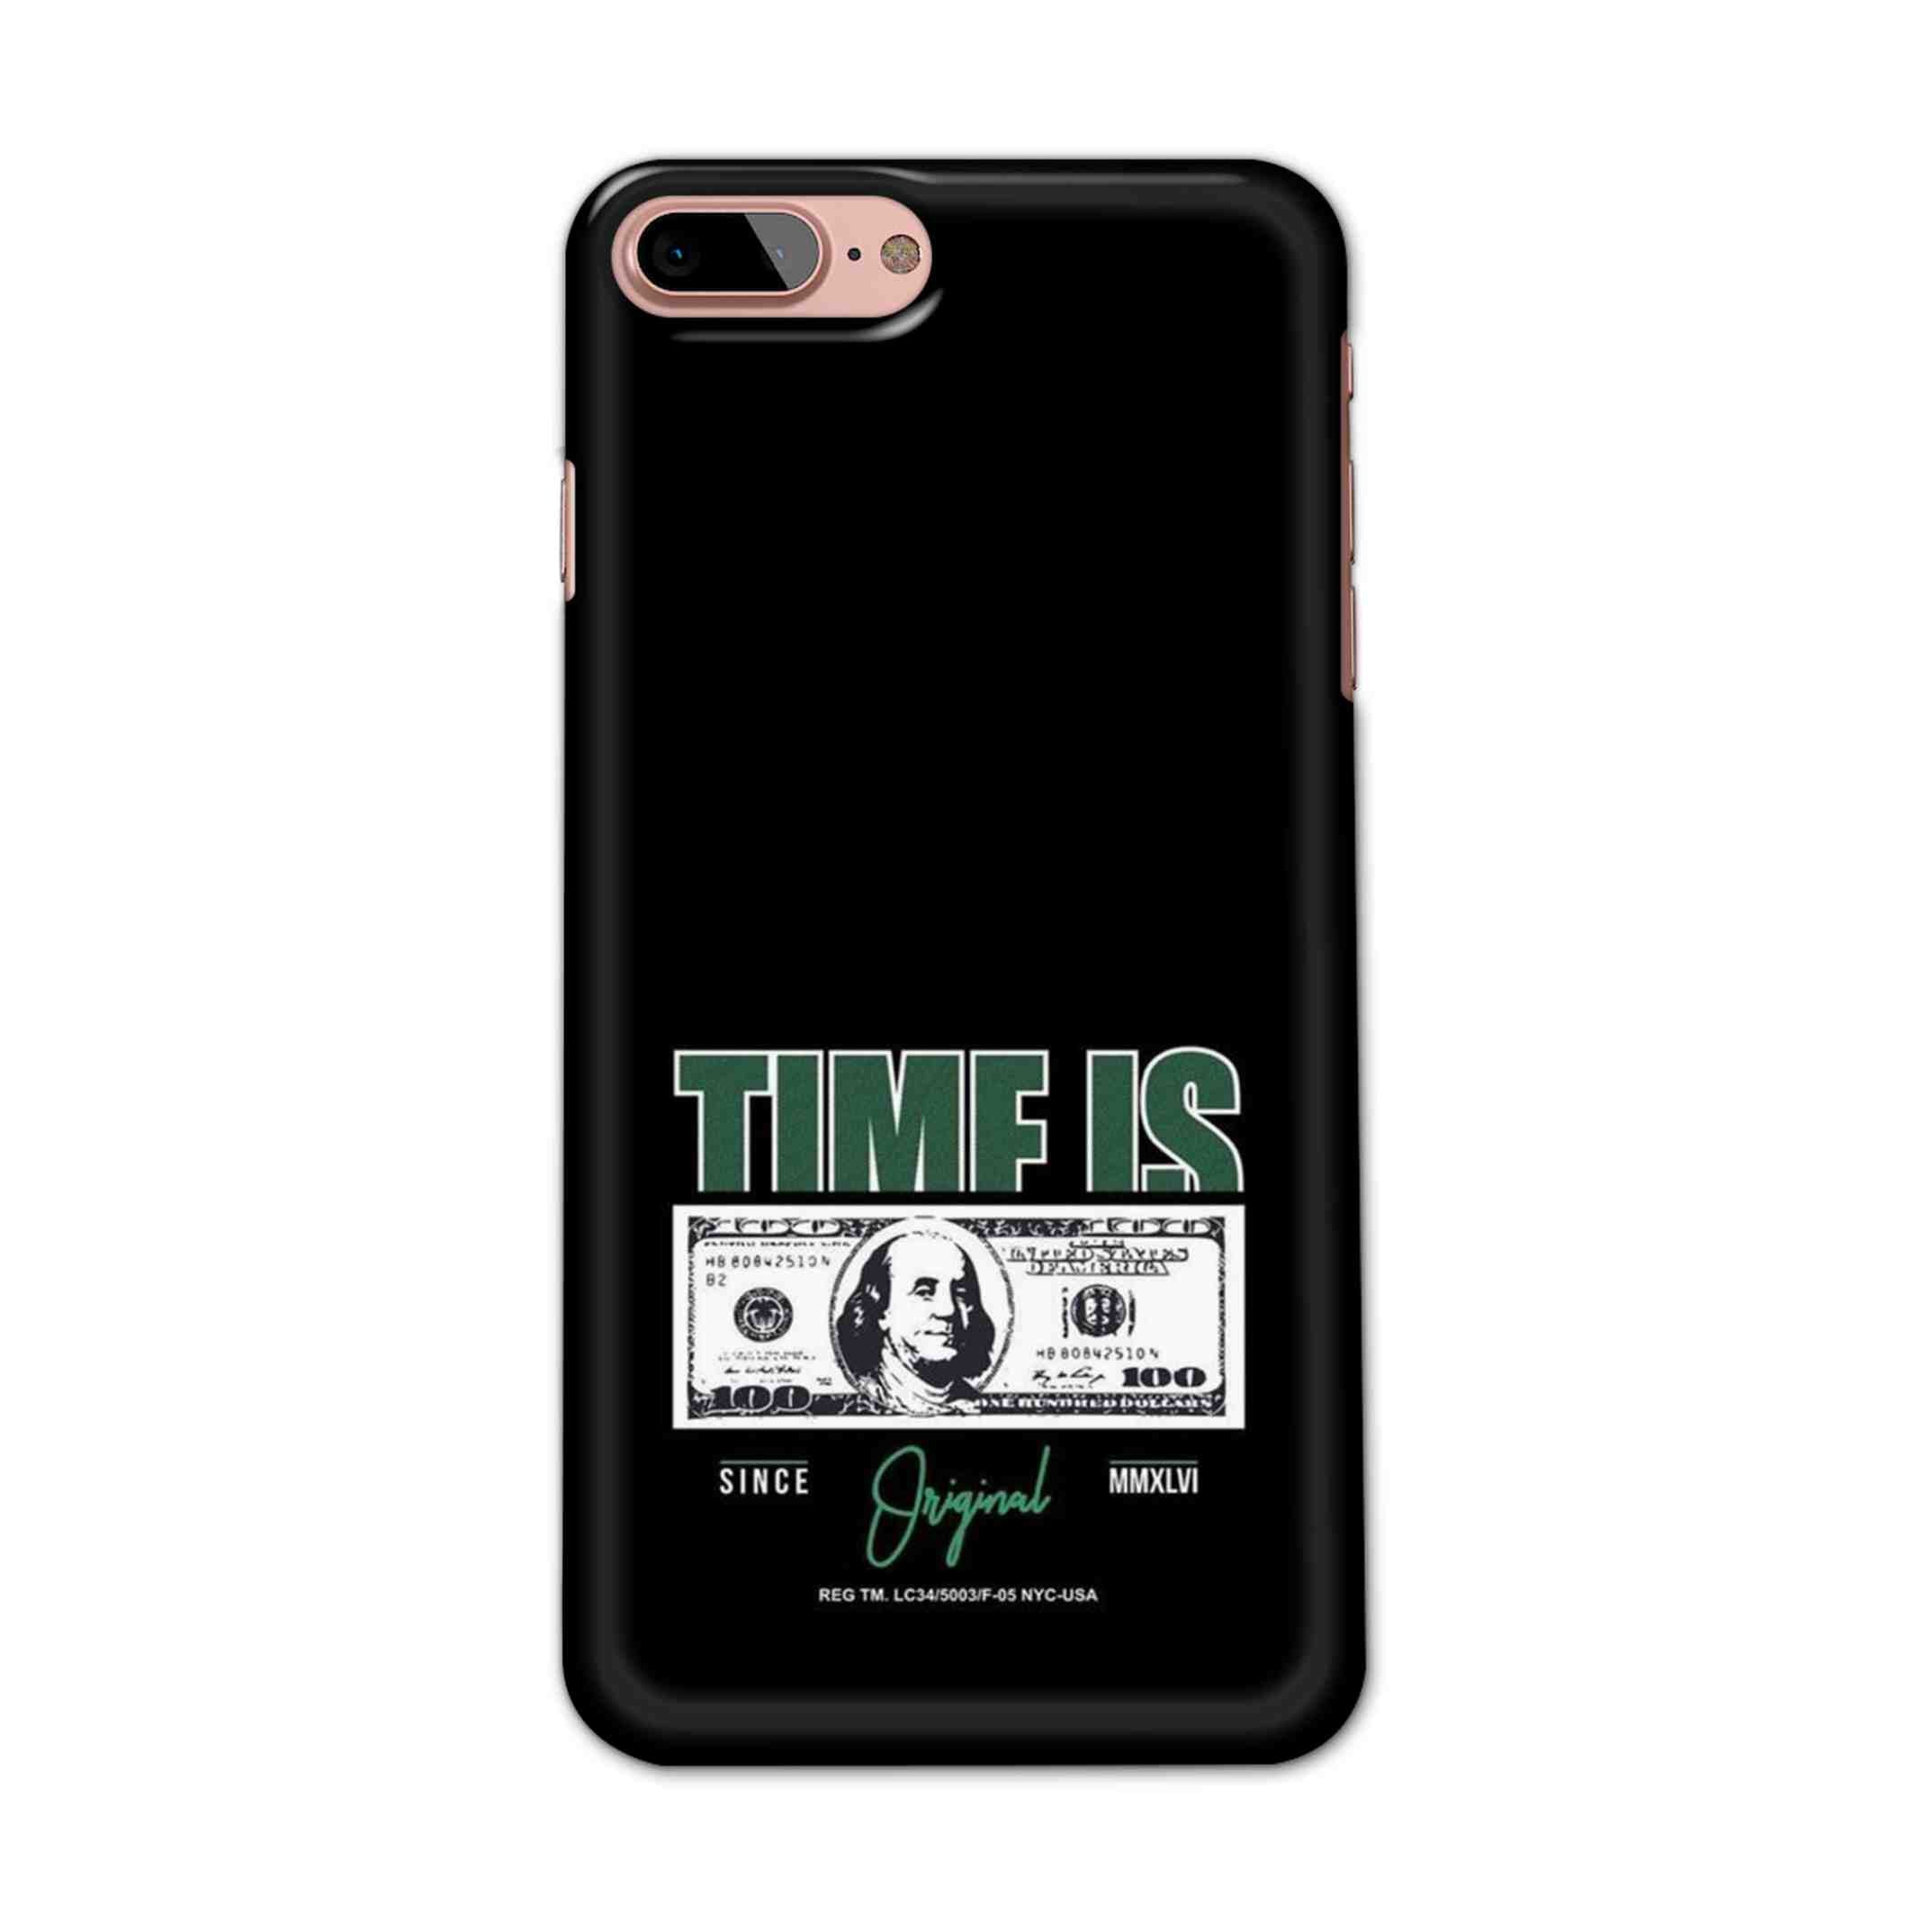 Buy Time Is Money Hard Back Mobile Phone Case/Cover For iPhone 7 Plus / 8 Plus Online